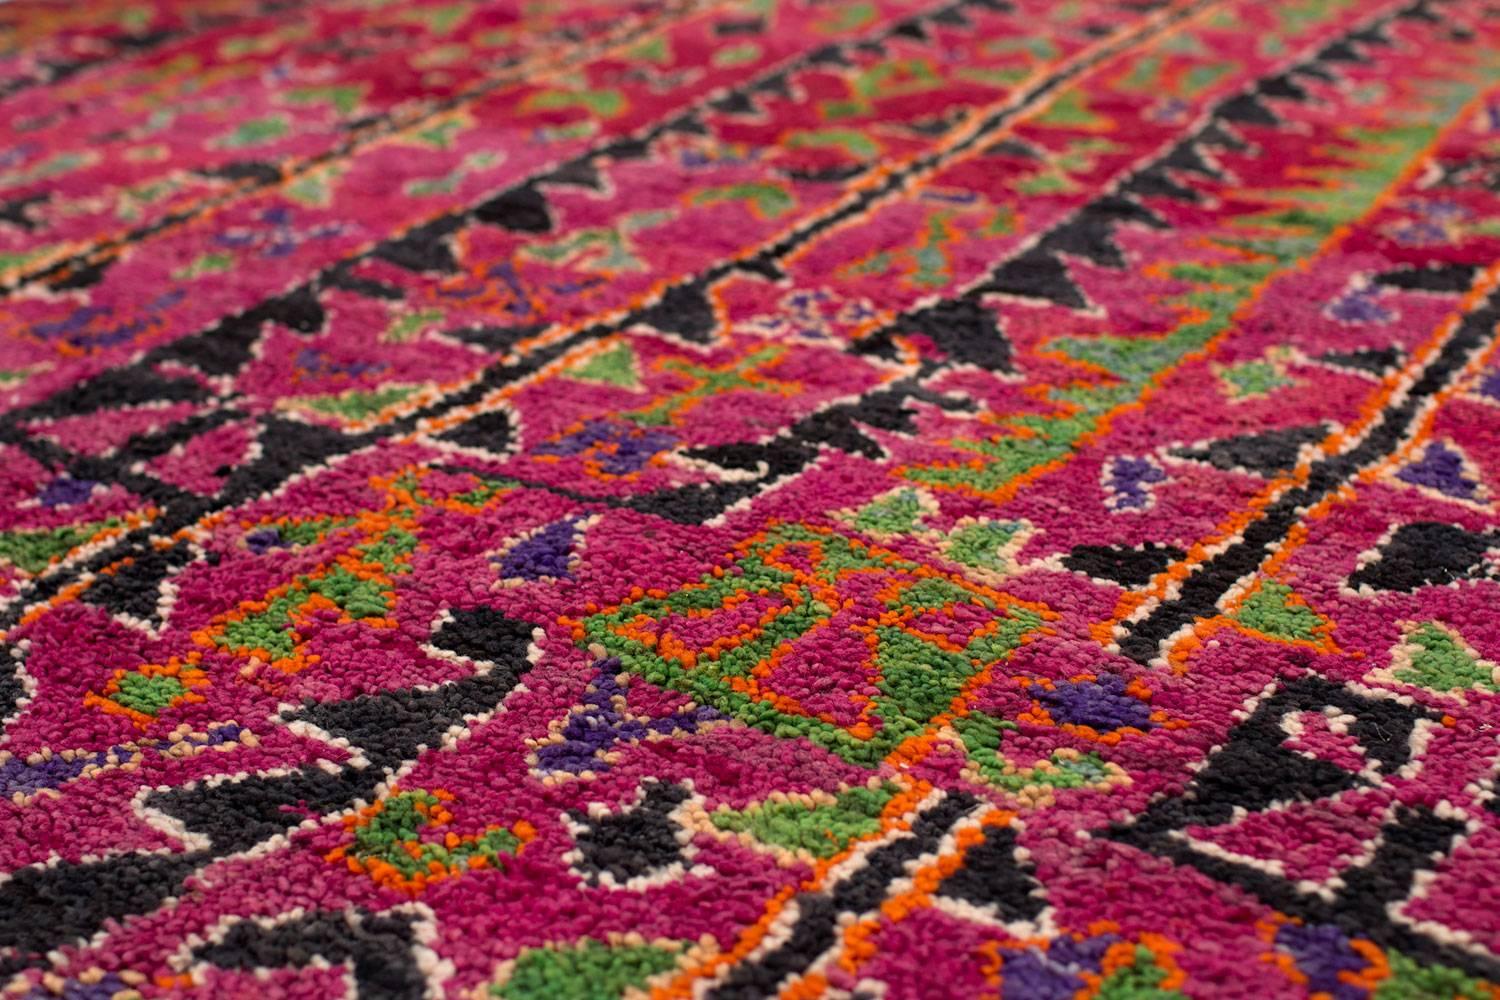 Hand-Woven Vibrant Moroccan Rug with Banded Kilims